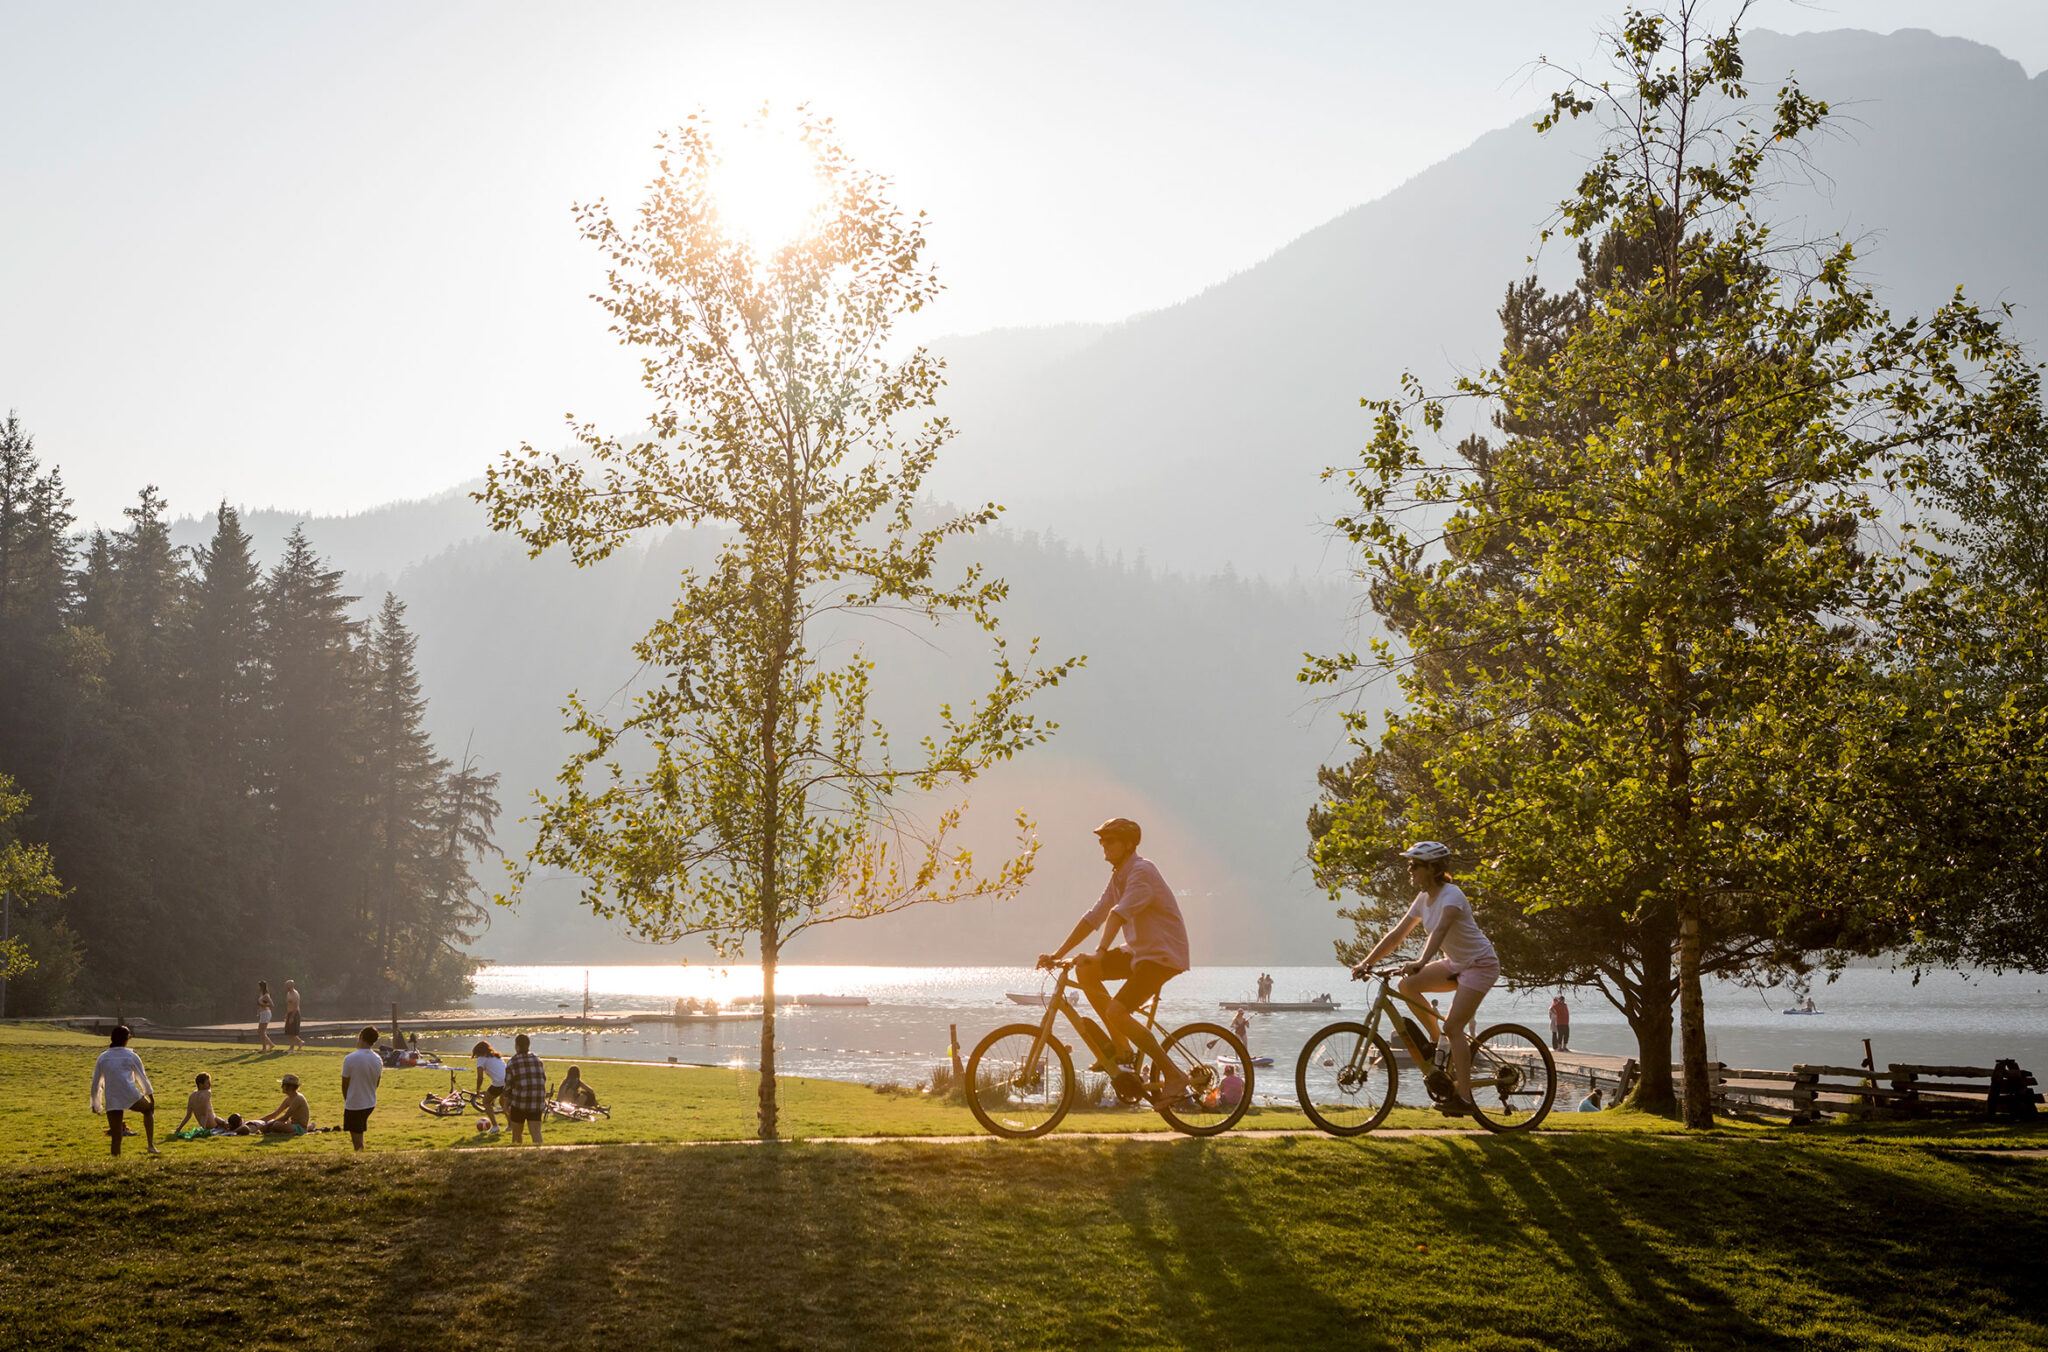 Two bikers peacefully ride through Rainbow Park on a sunny, summer's day in Whistler.